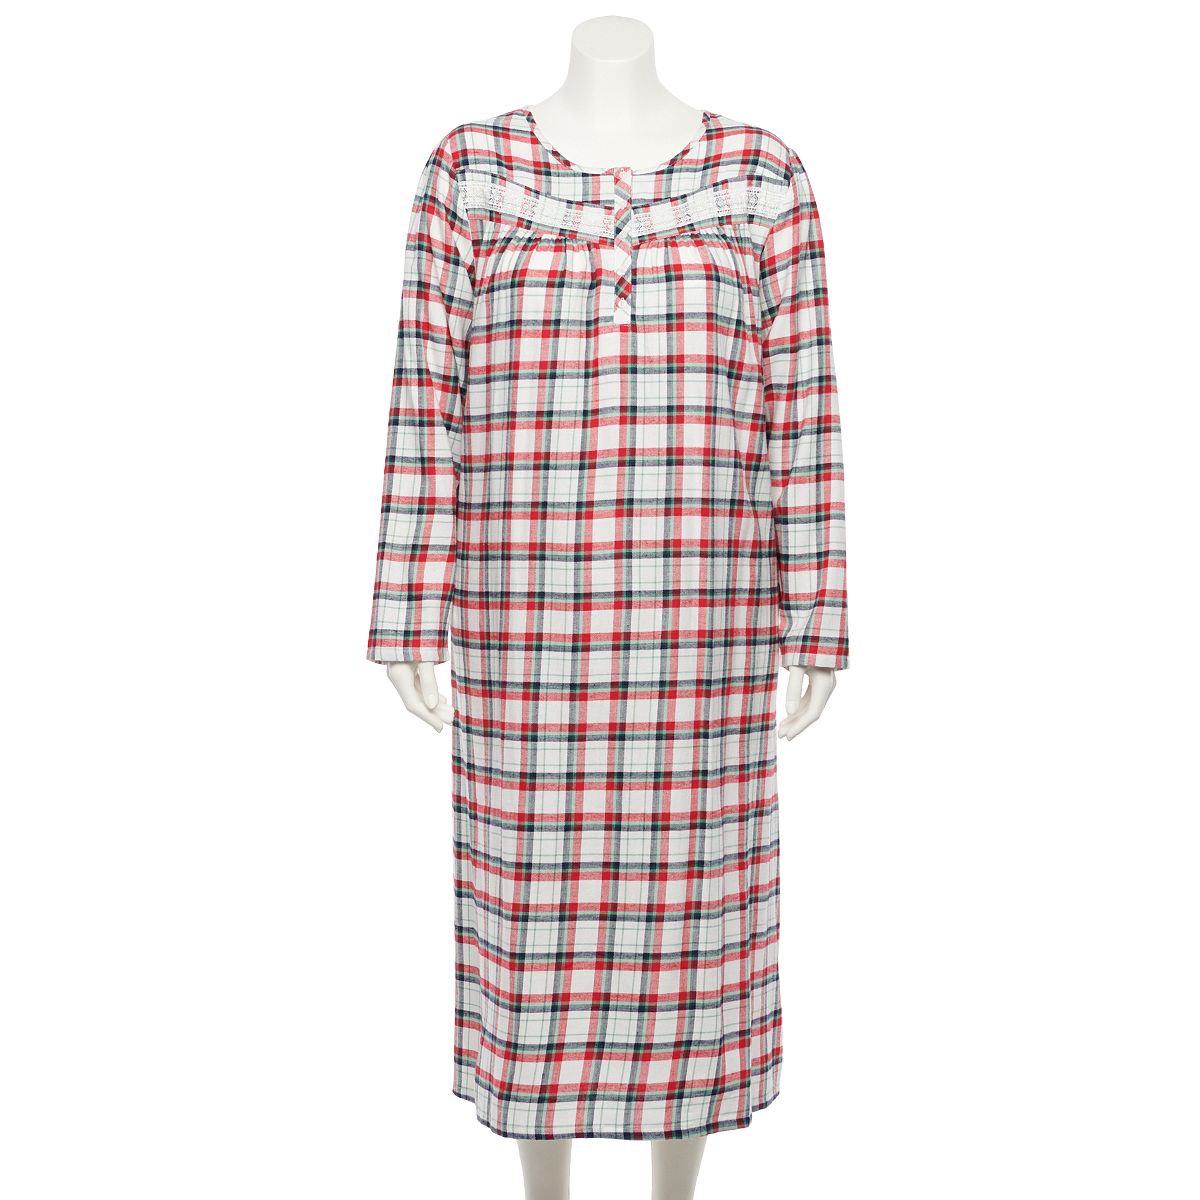 Flannel Nightgowns: Get Comfy and Cozy in Flannel Nightgowns